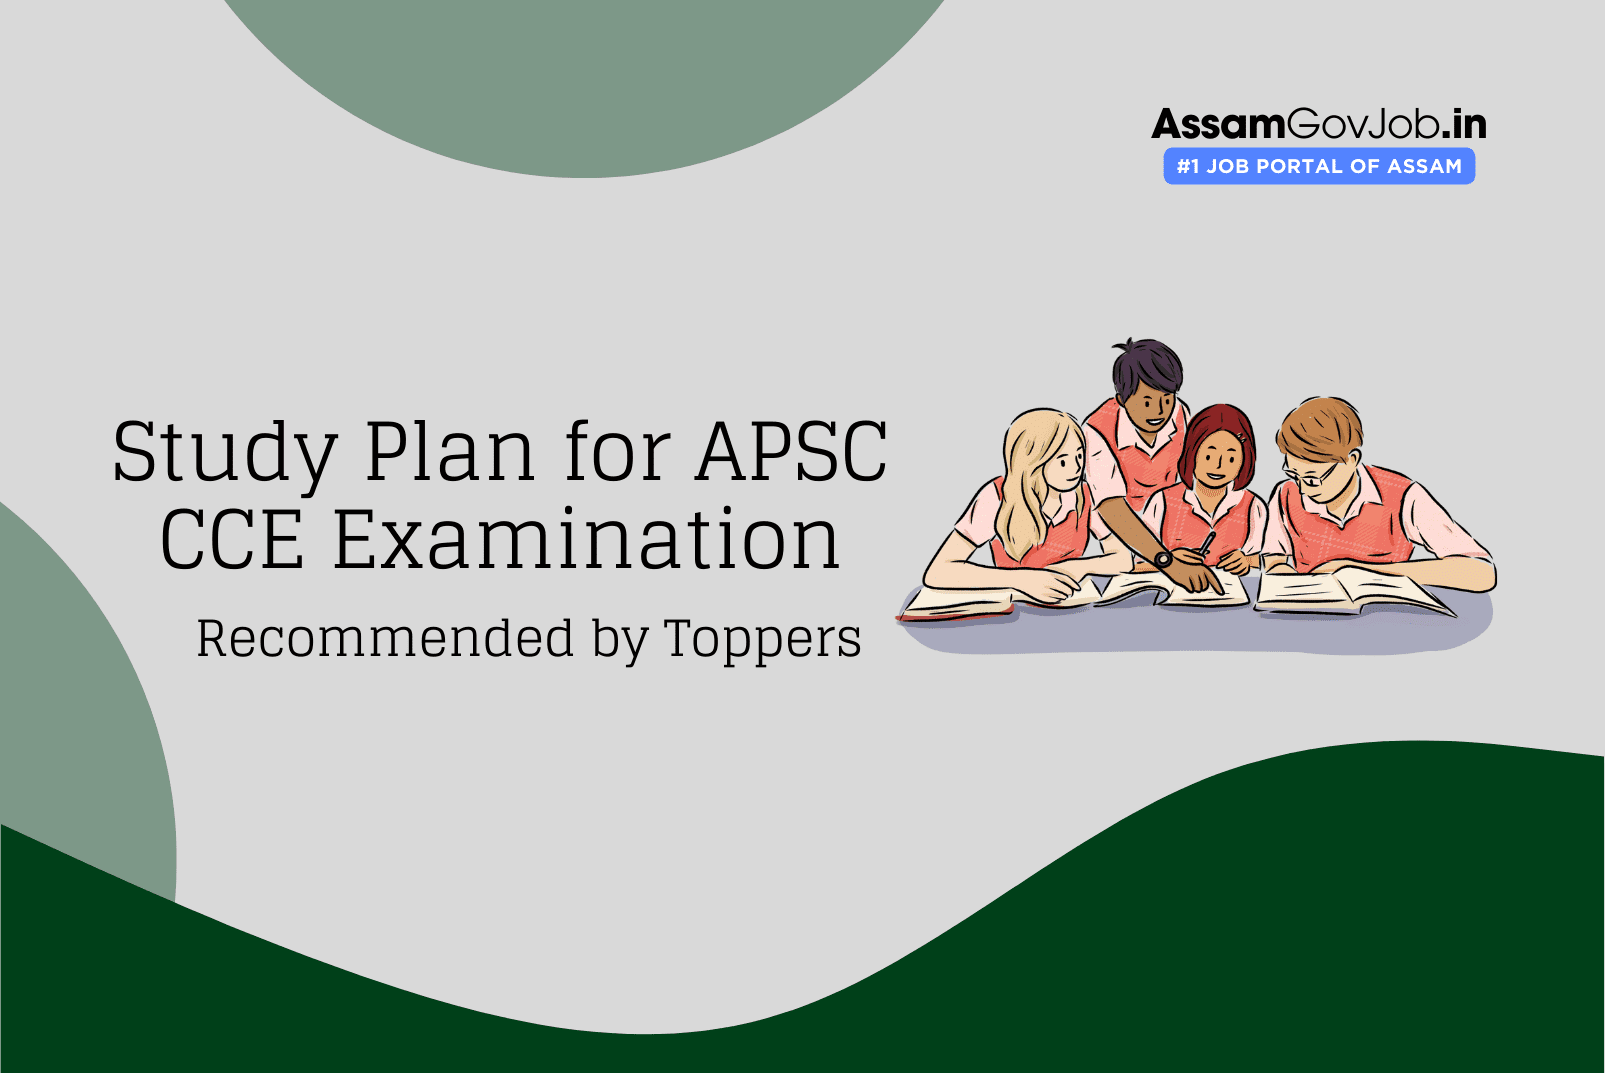 Study Plan for APSC CCE Examination